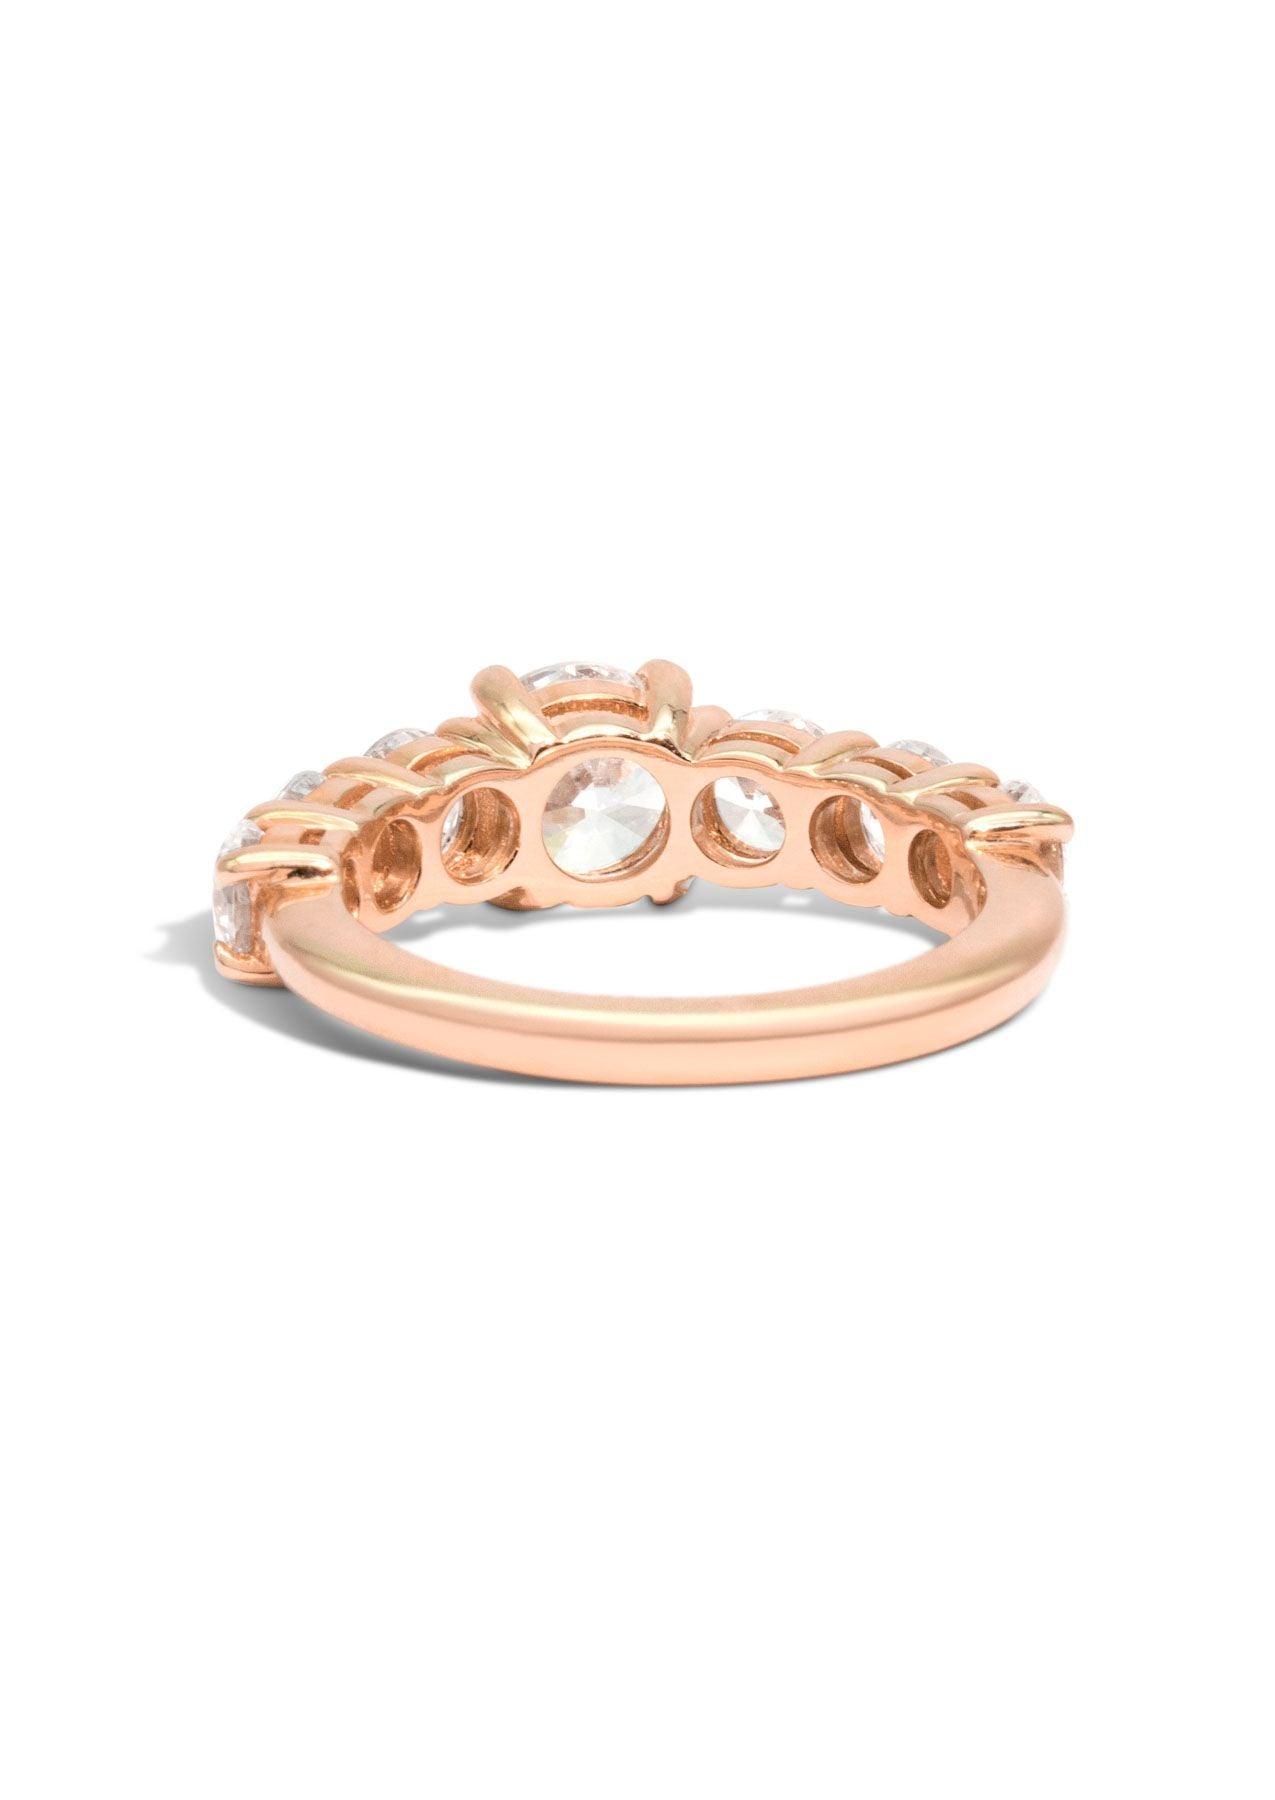 The Round Brilliant Banks Rose Gold Cultured Diamond Ring - Molten Store